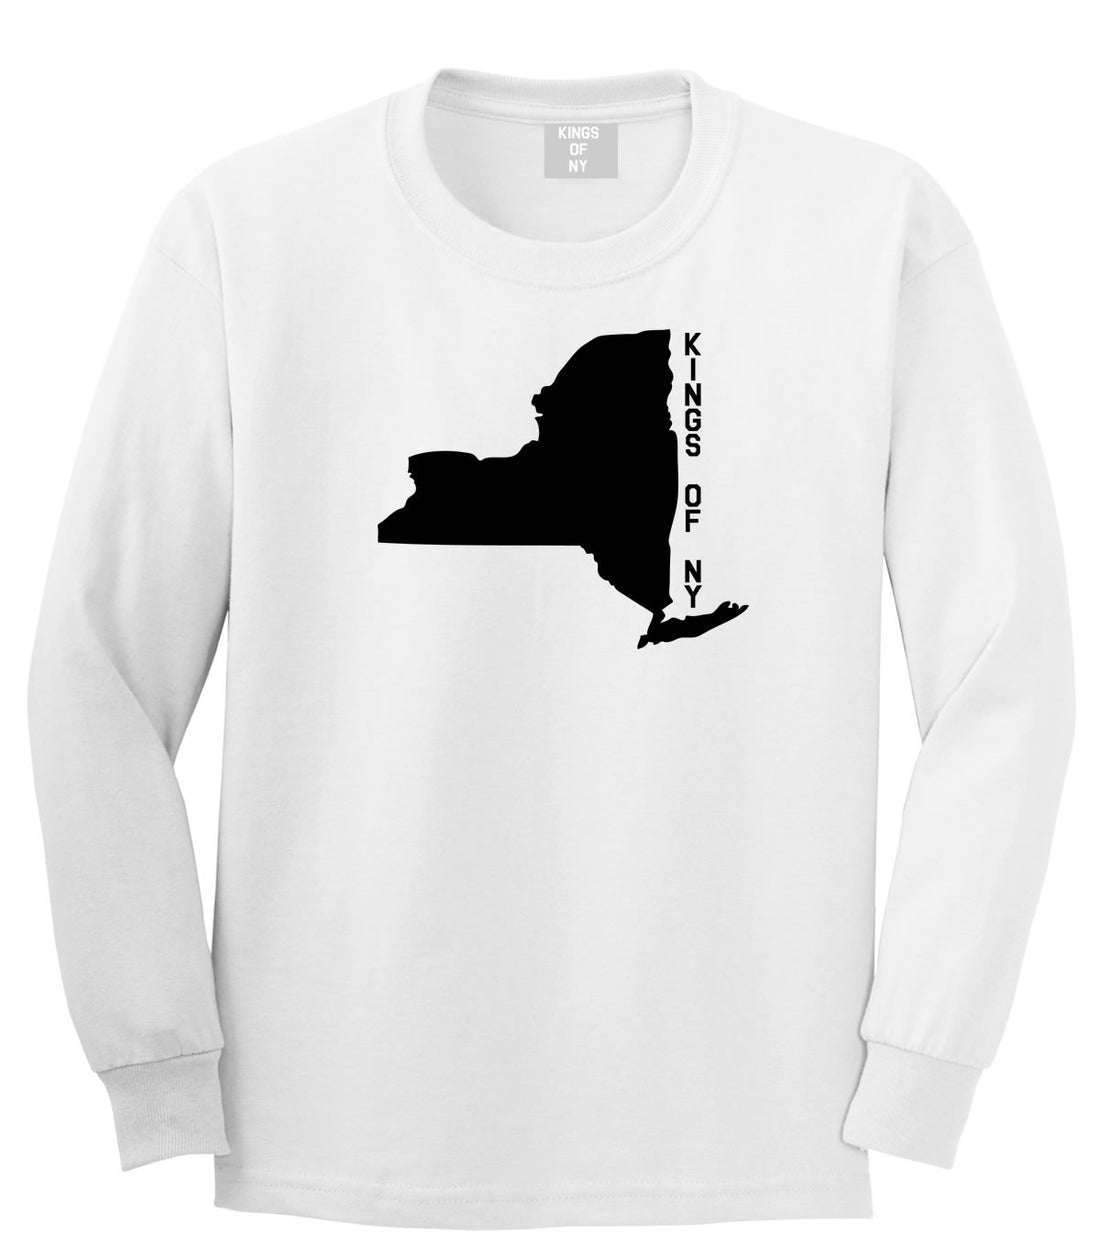 New York State Shape Long Sleeve T-Shirt in White By Kings Of NY